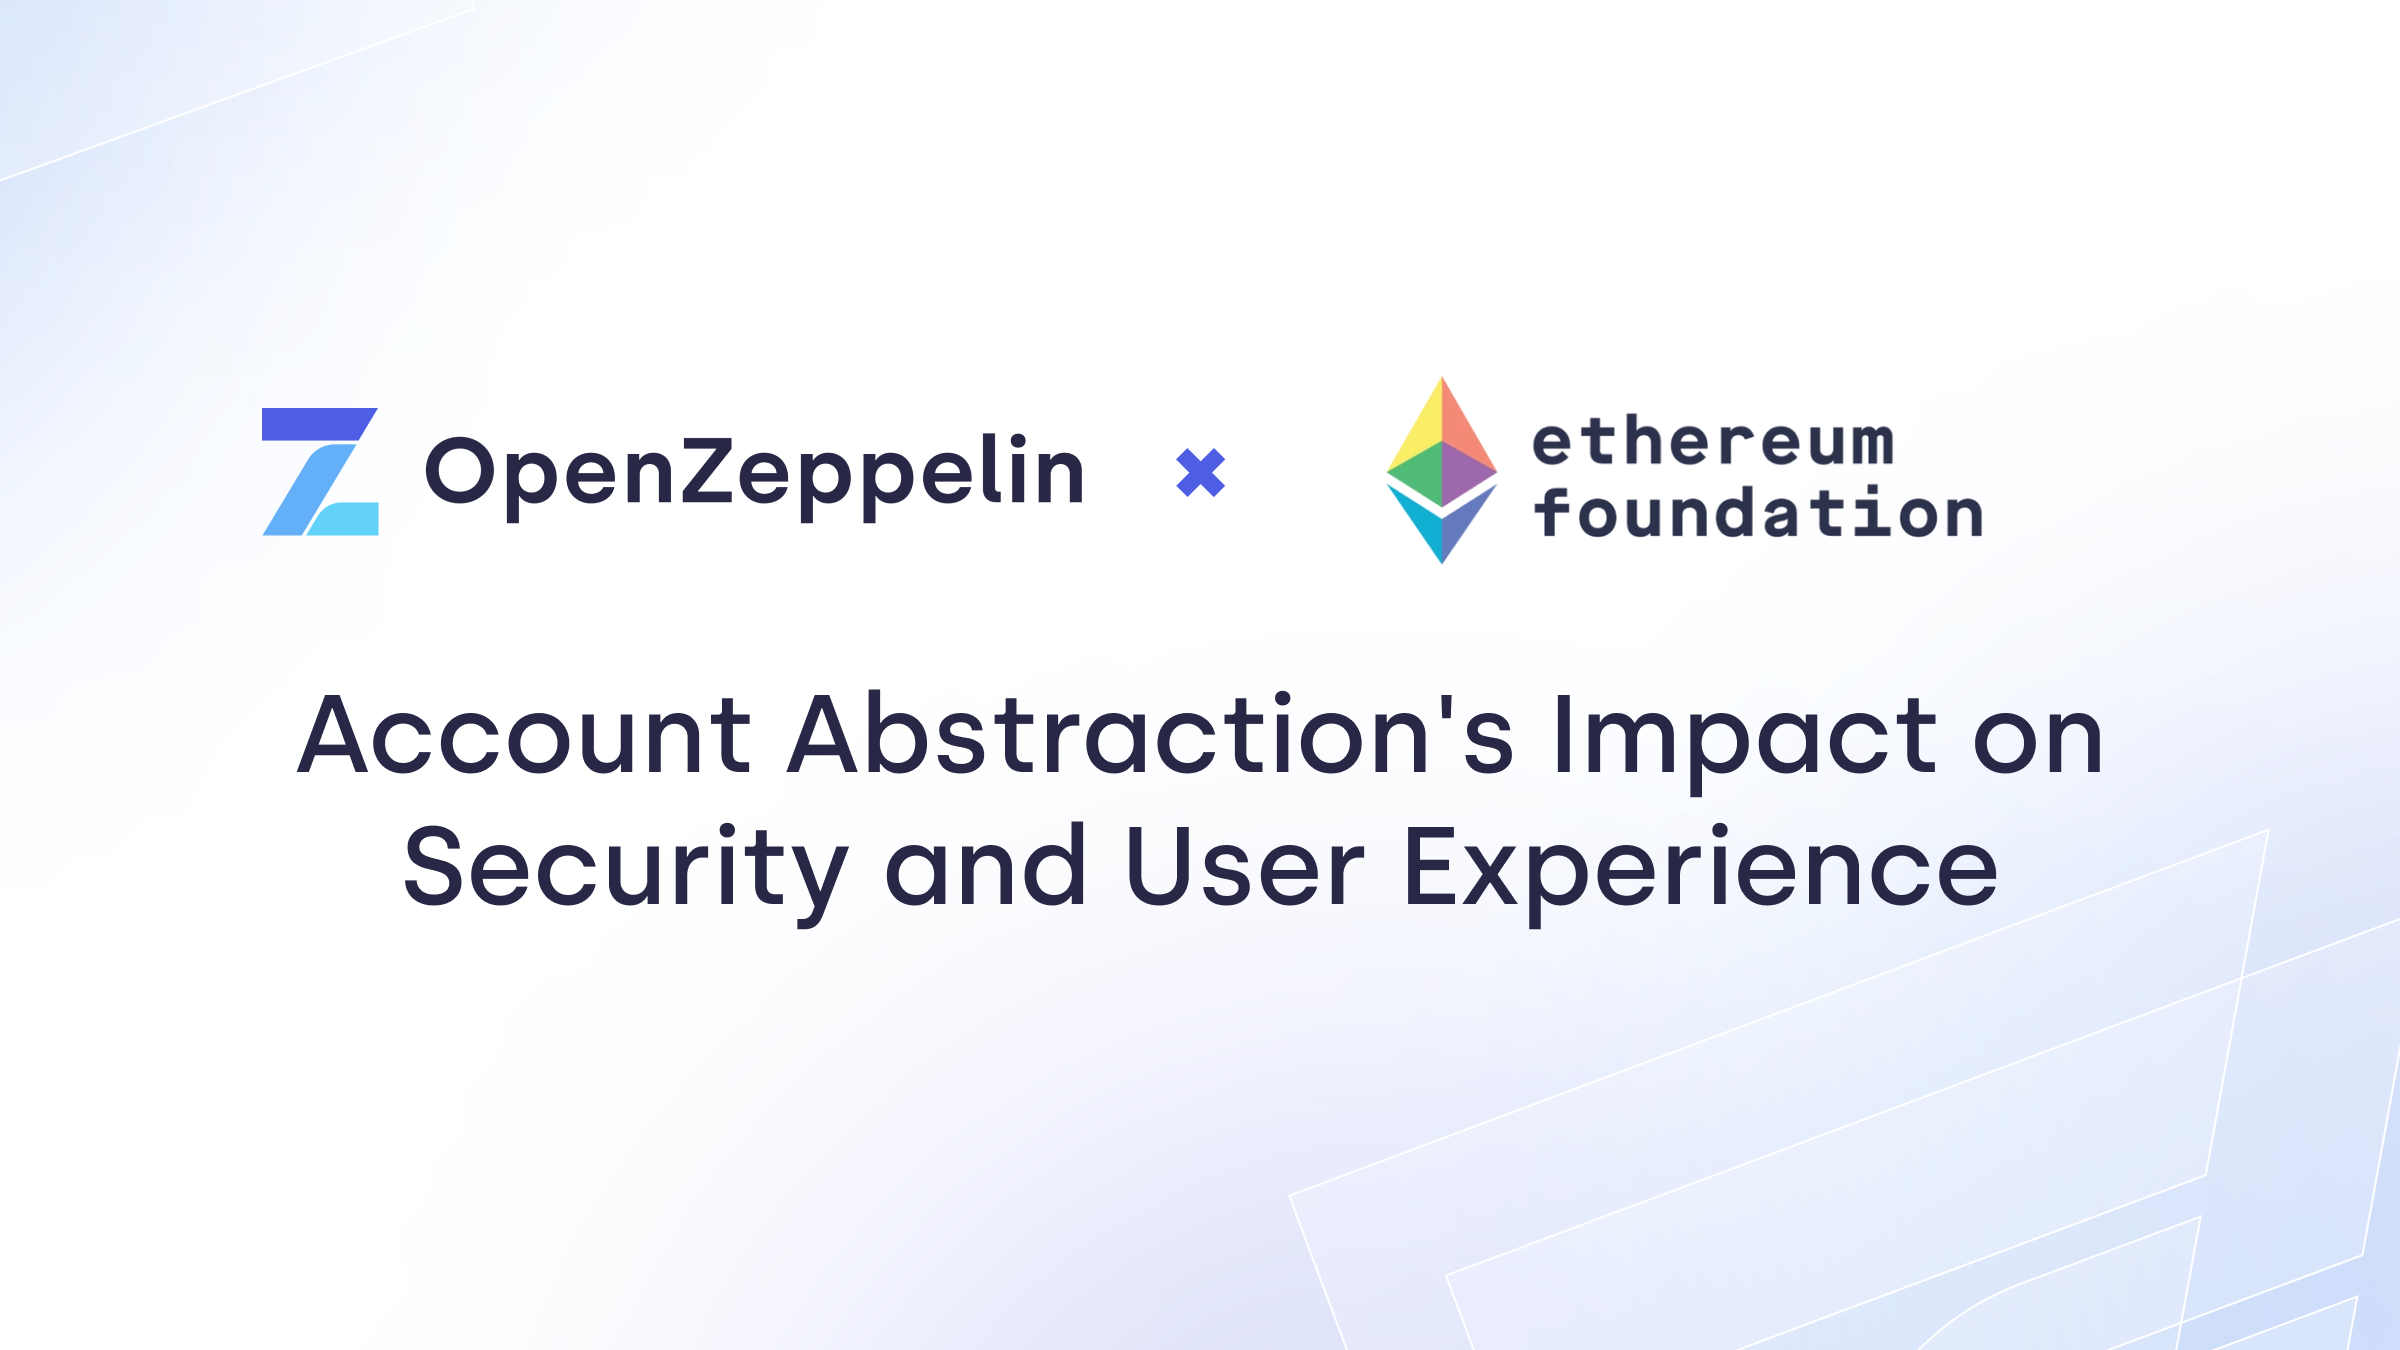 Account Abstraction’s Impact on Security and User Experience